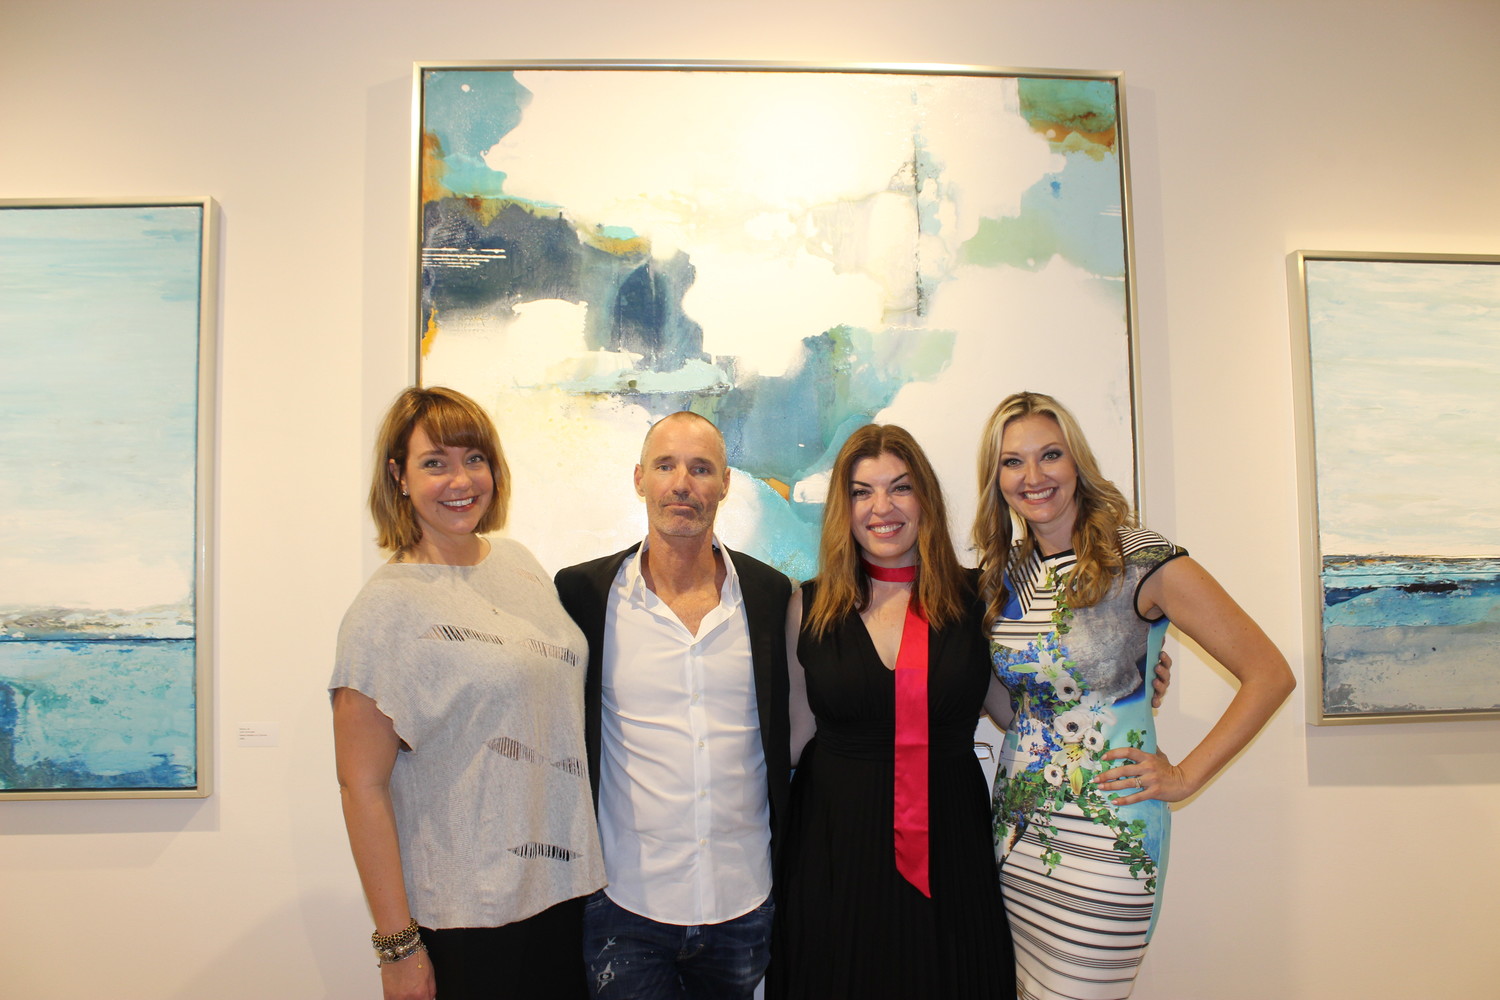 Toni Boudreaux, John Schuyler, Jennifer JL Jones and Hillary Whitaker gather at the spring show held at Stellers Gallery at Ponte Vedra Beach on April 13.